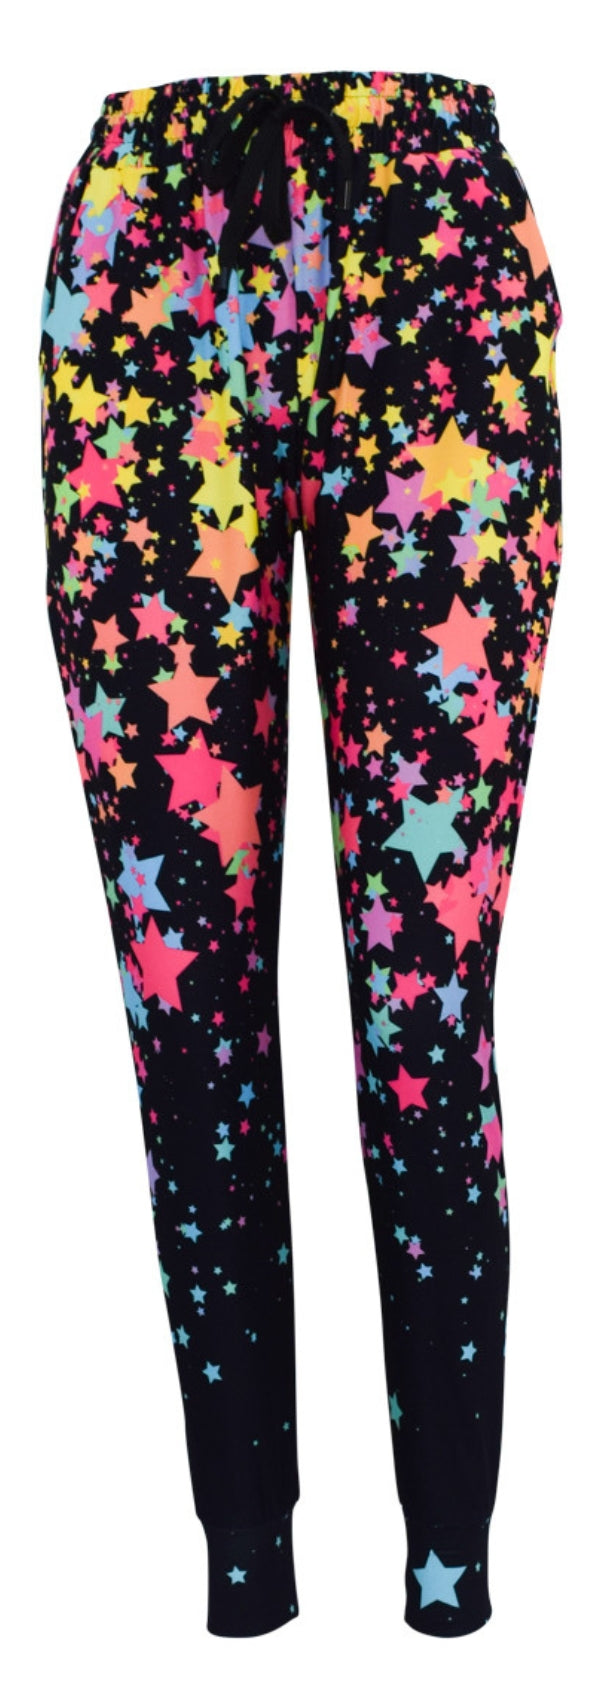 Starbright Lejoggers-Joggers